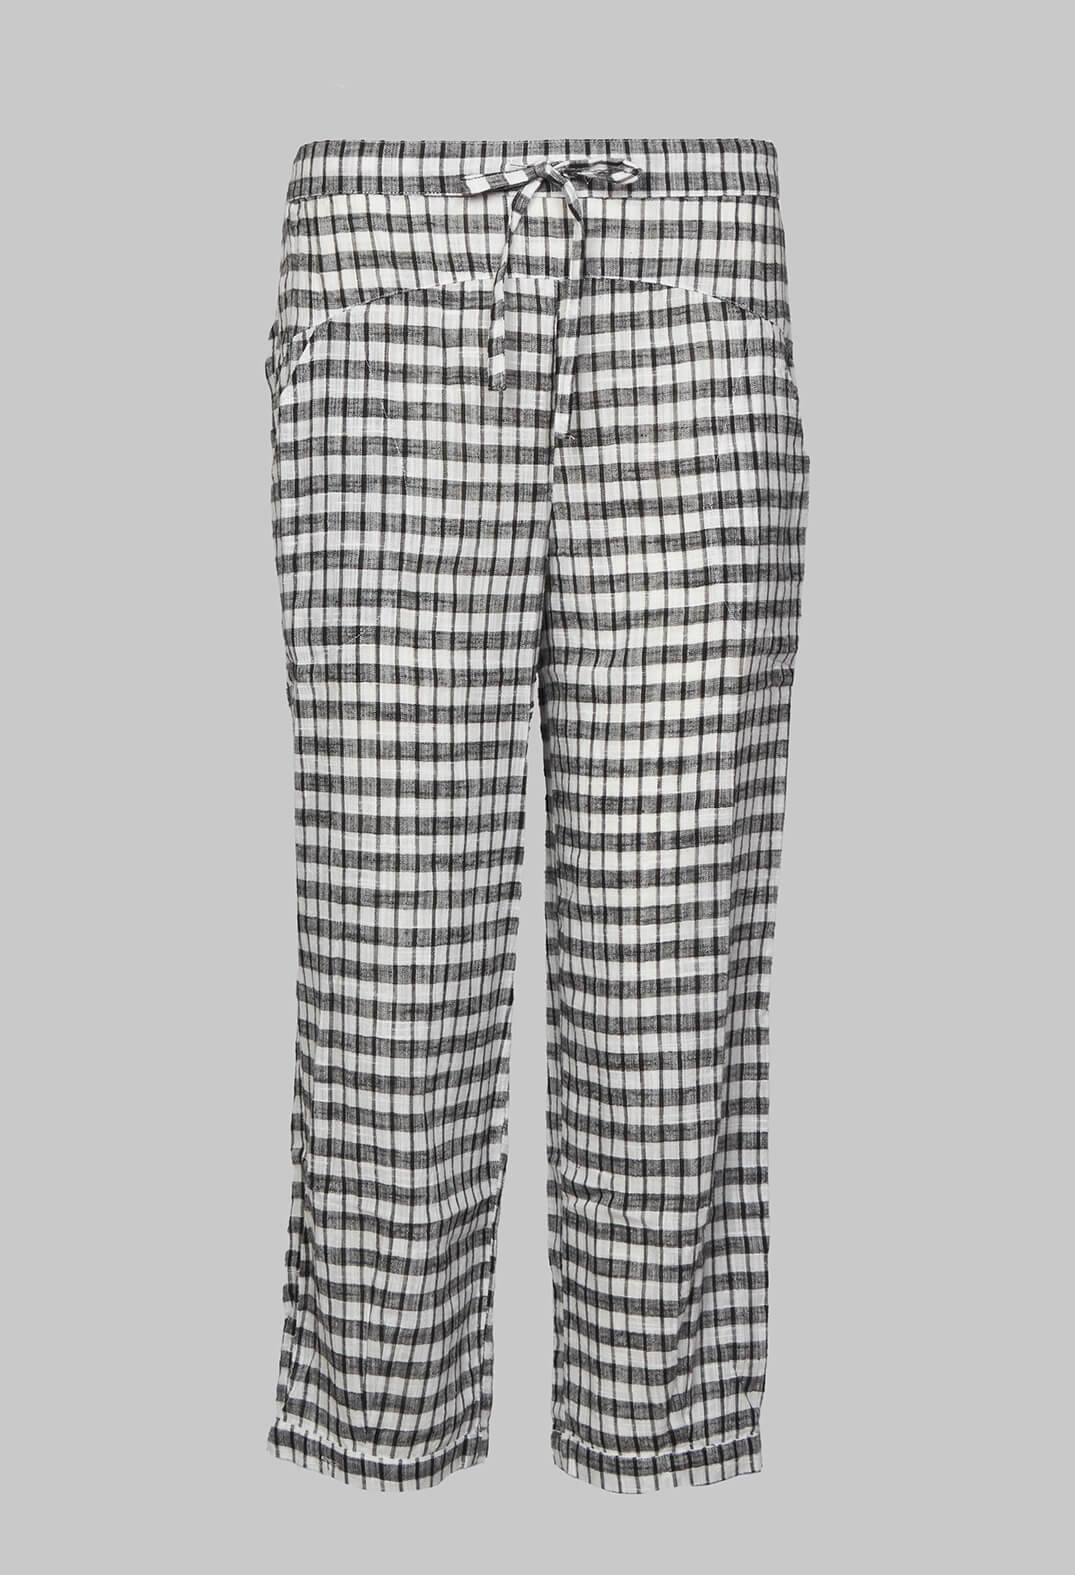 Lightweight Trousers in Coco Black and White Check